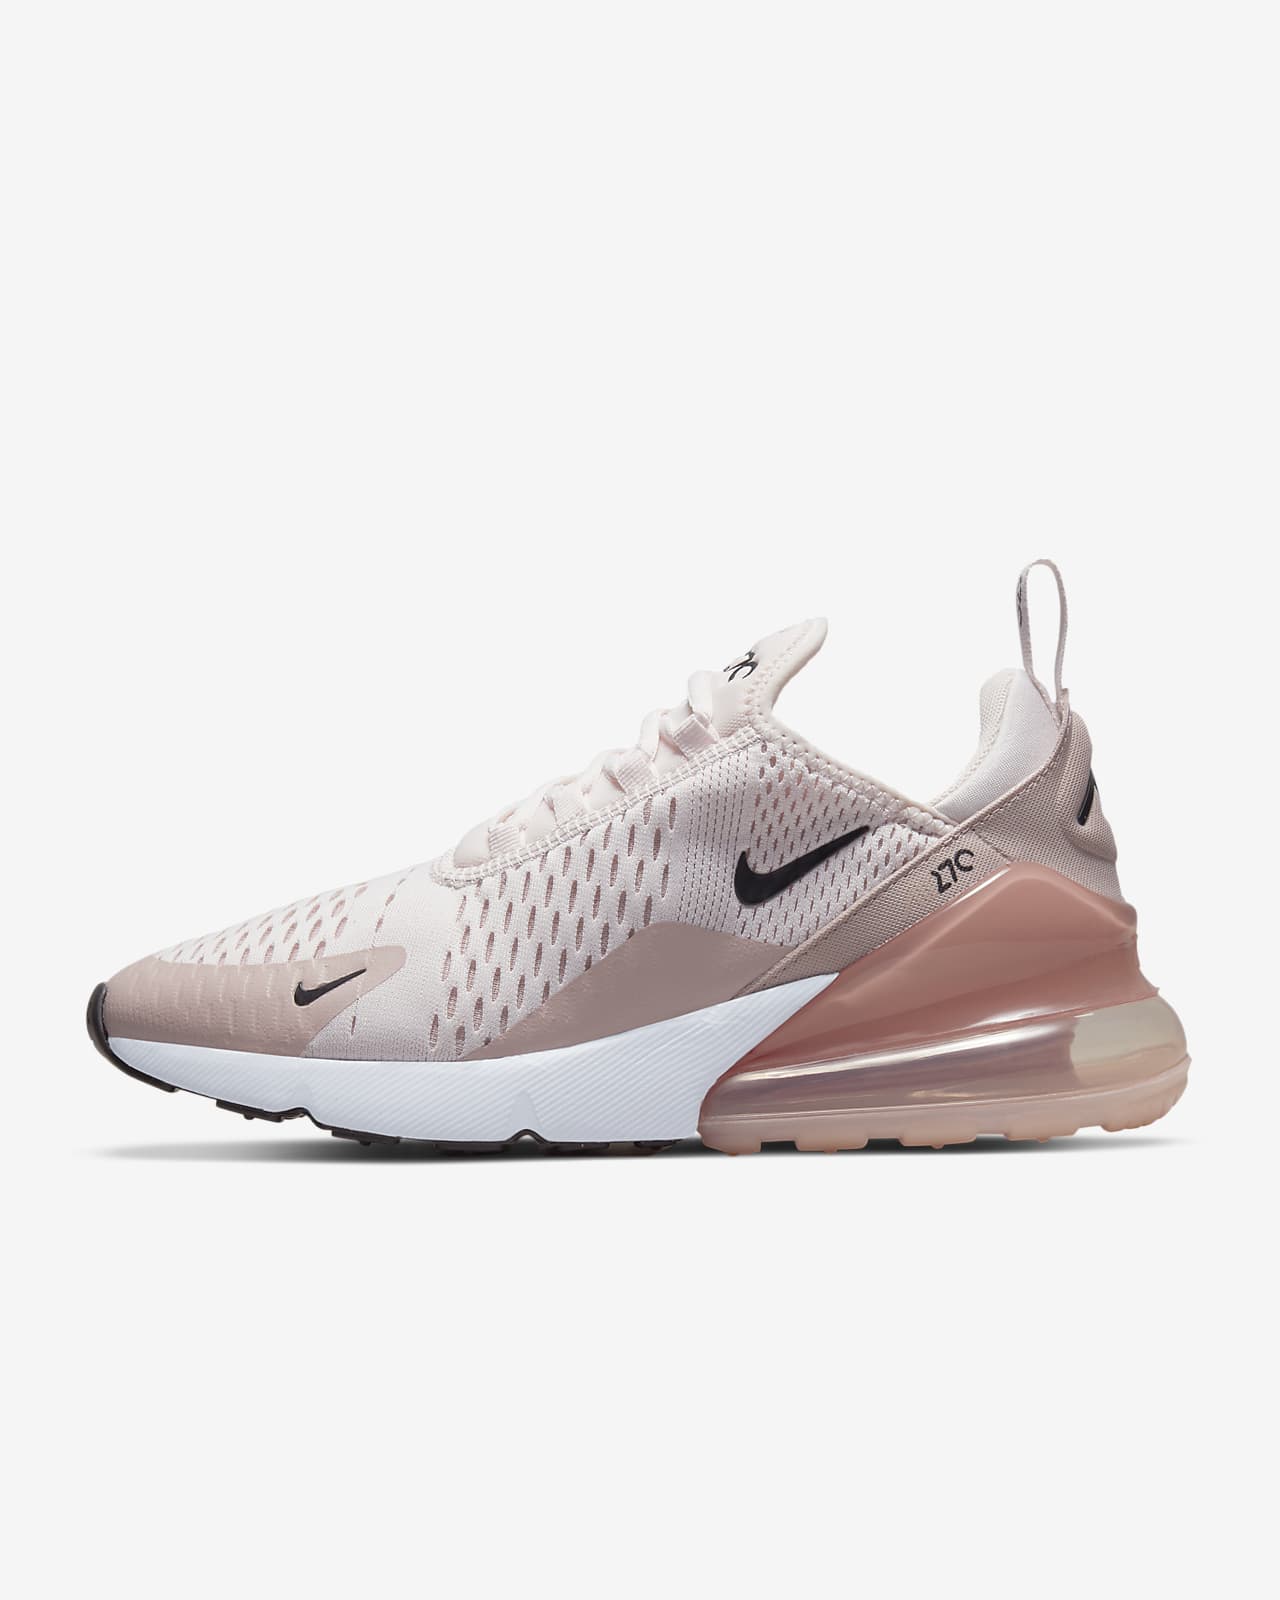 ask protection The database Nike Air Max 270 Women's Shoes. Nike CZ